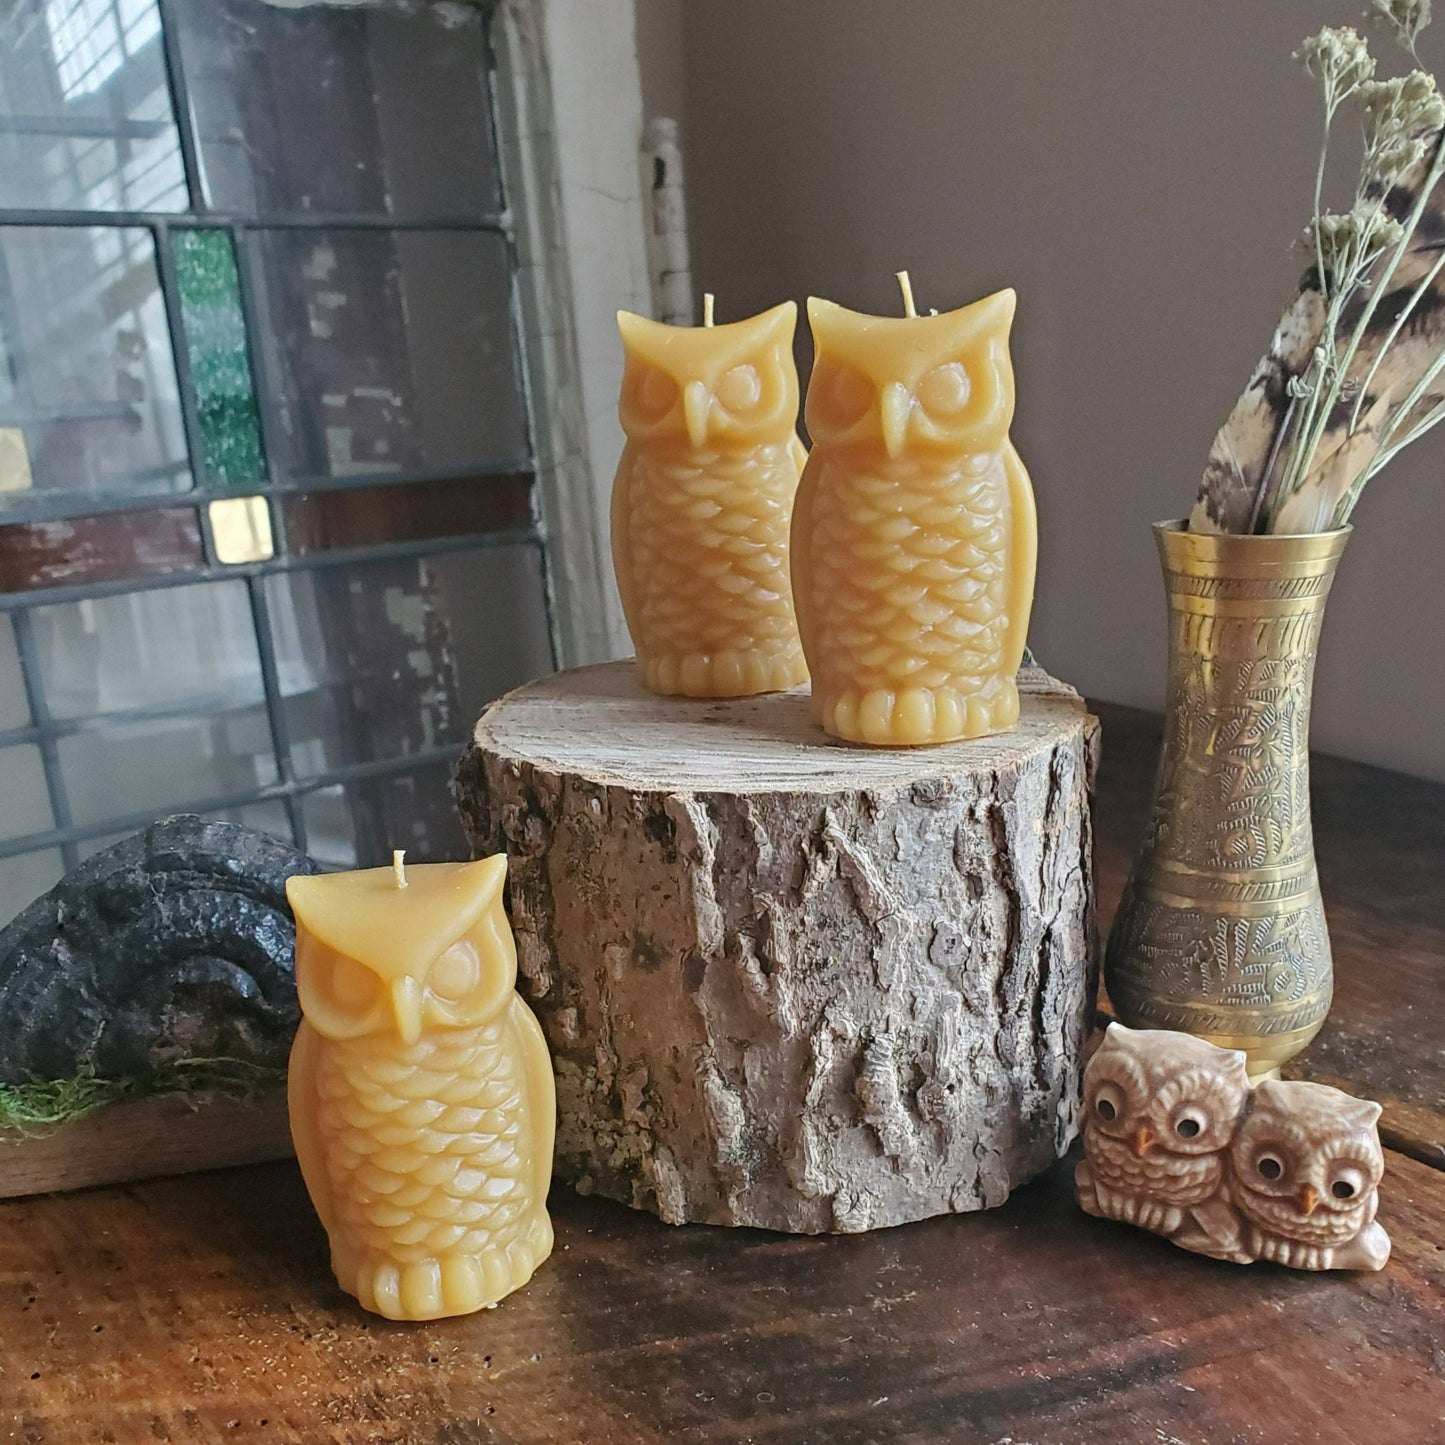 Owl Beeswax Candle